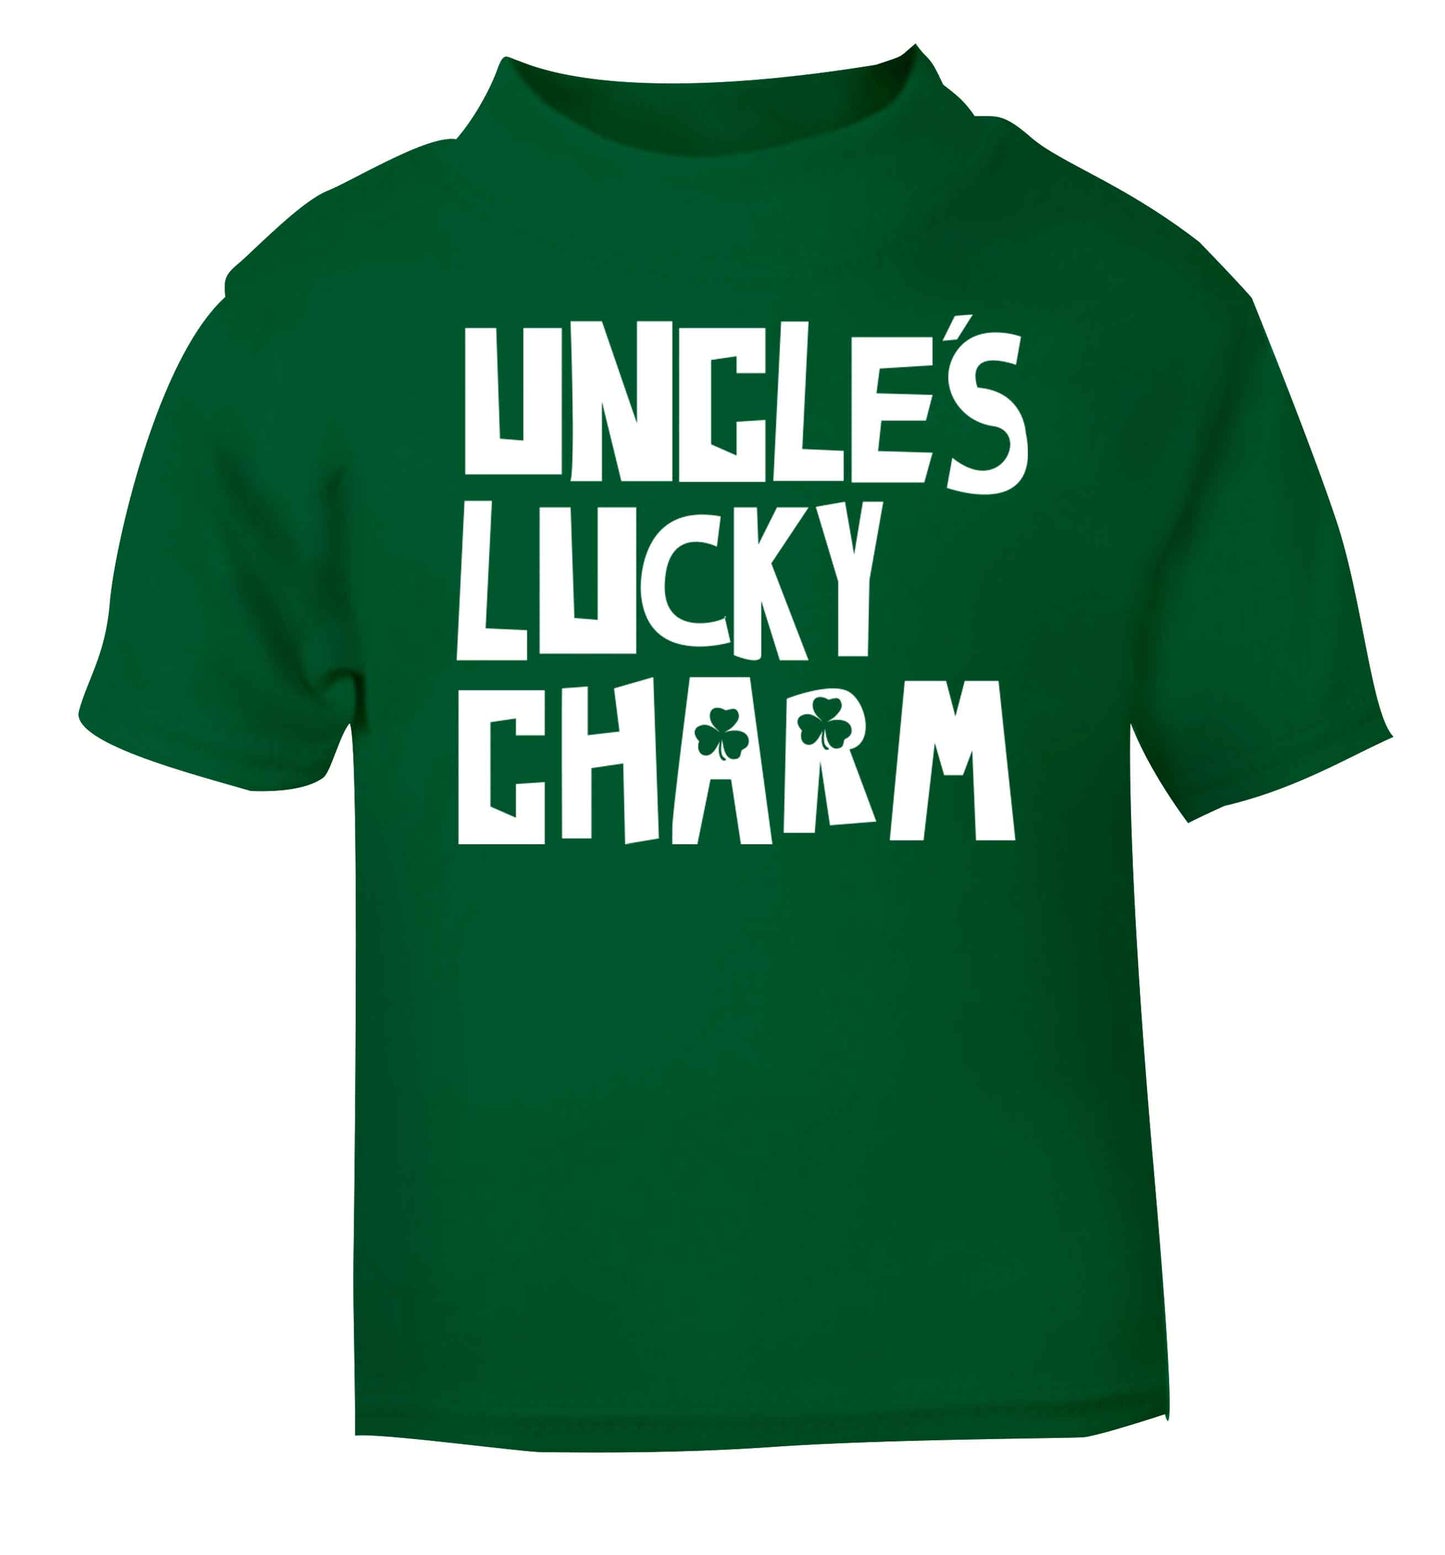 Uncles lucky charm green baby toddler Tshirt 2 Years